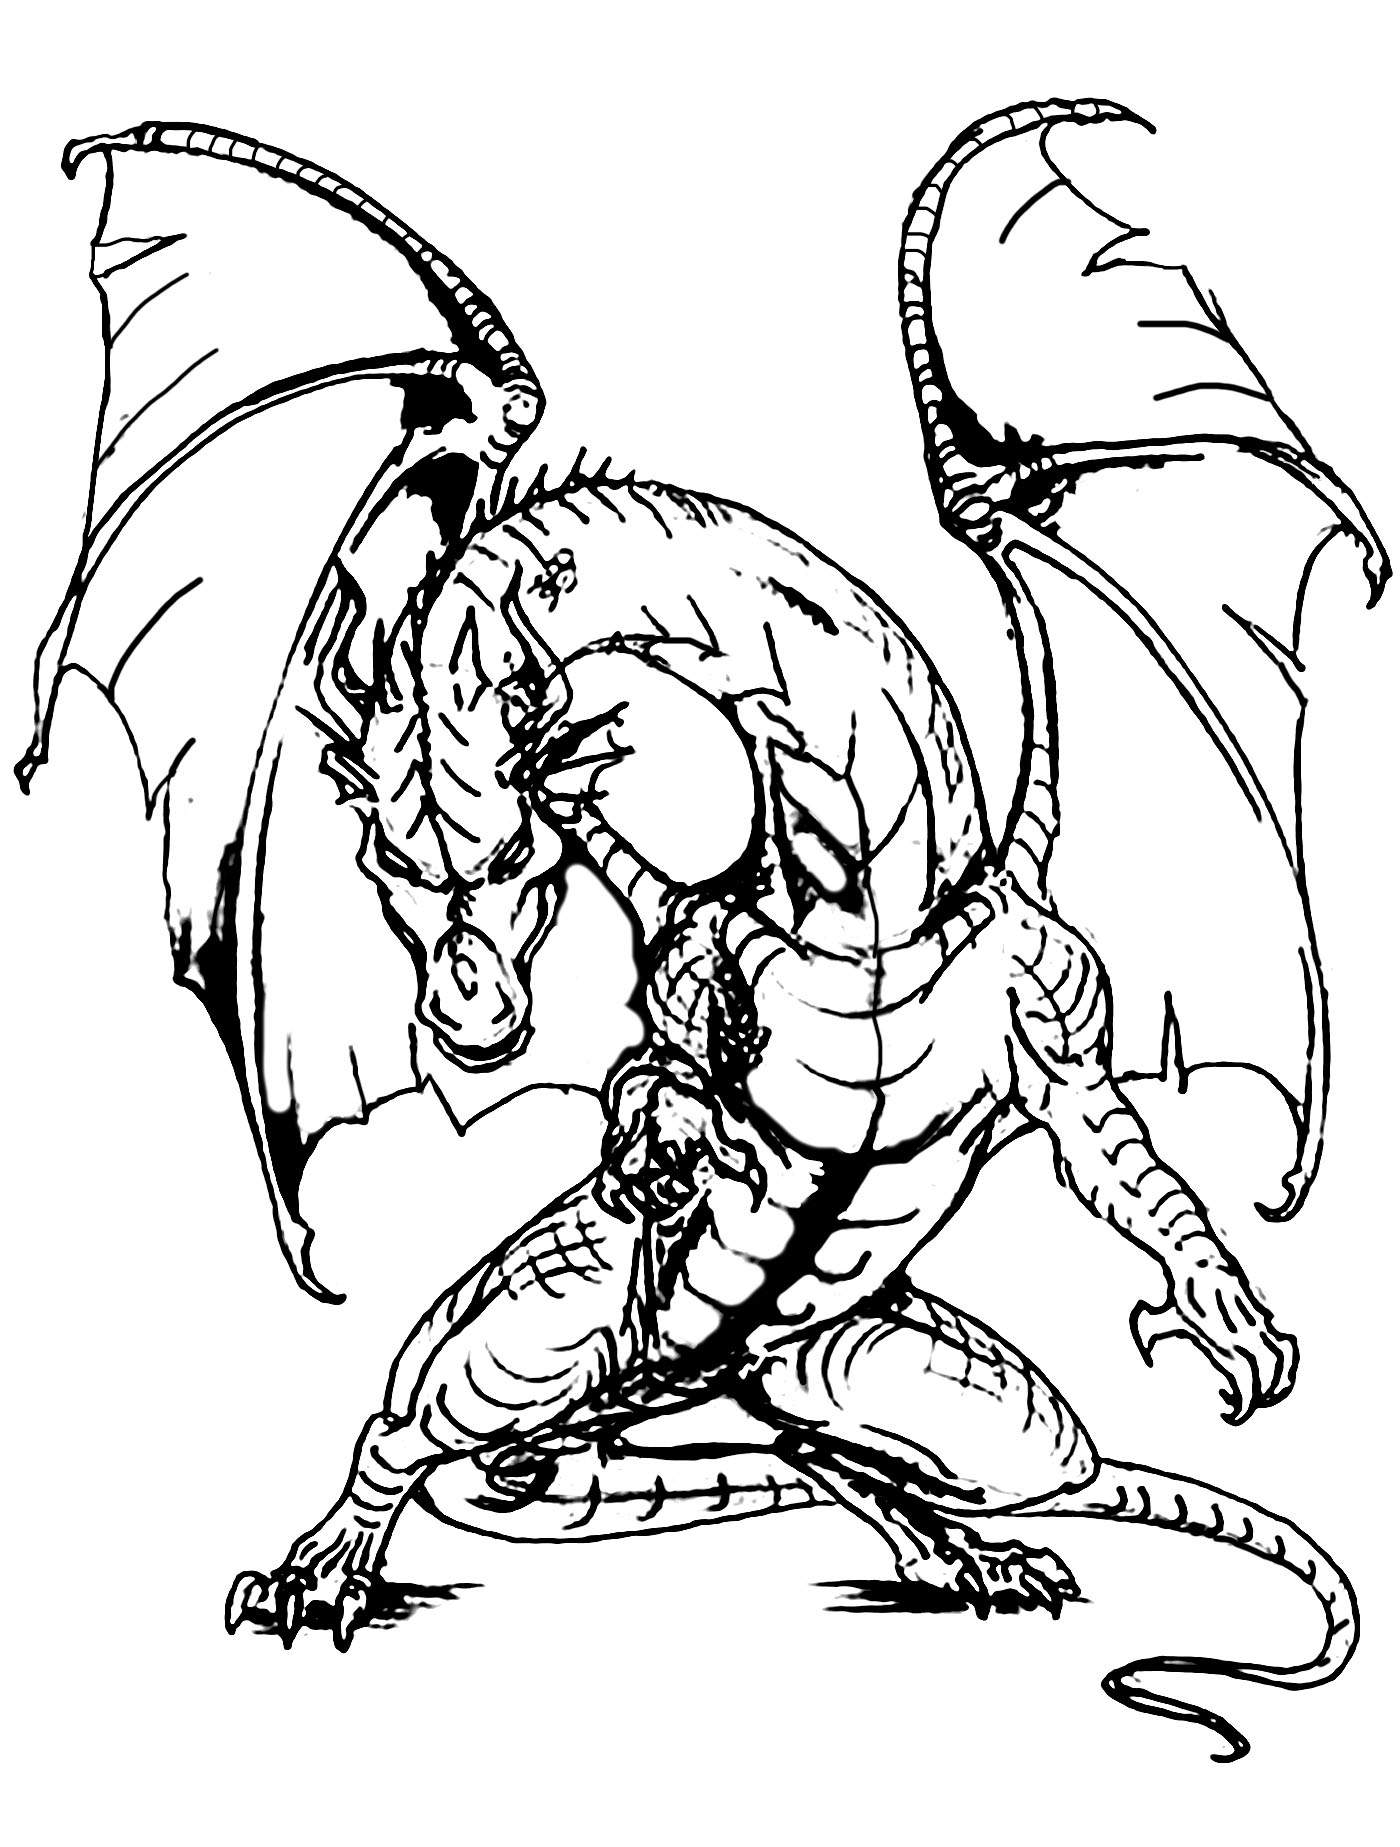 Dragon Coloring Pages for Adults Best Coloring Pages For Kids